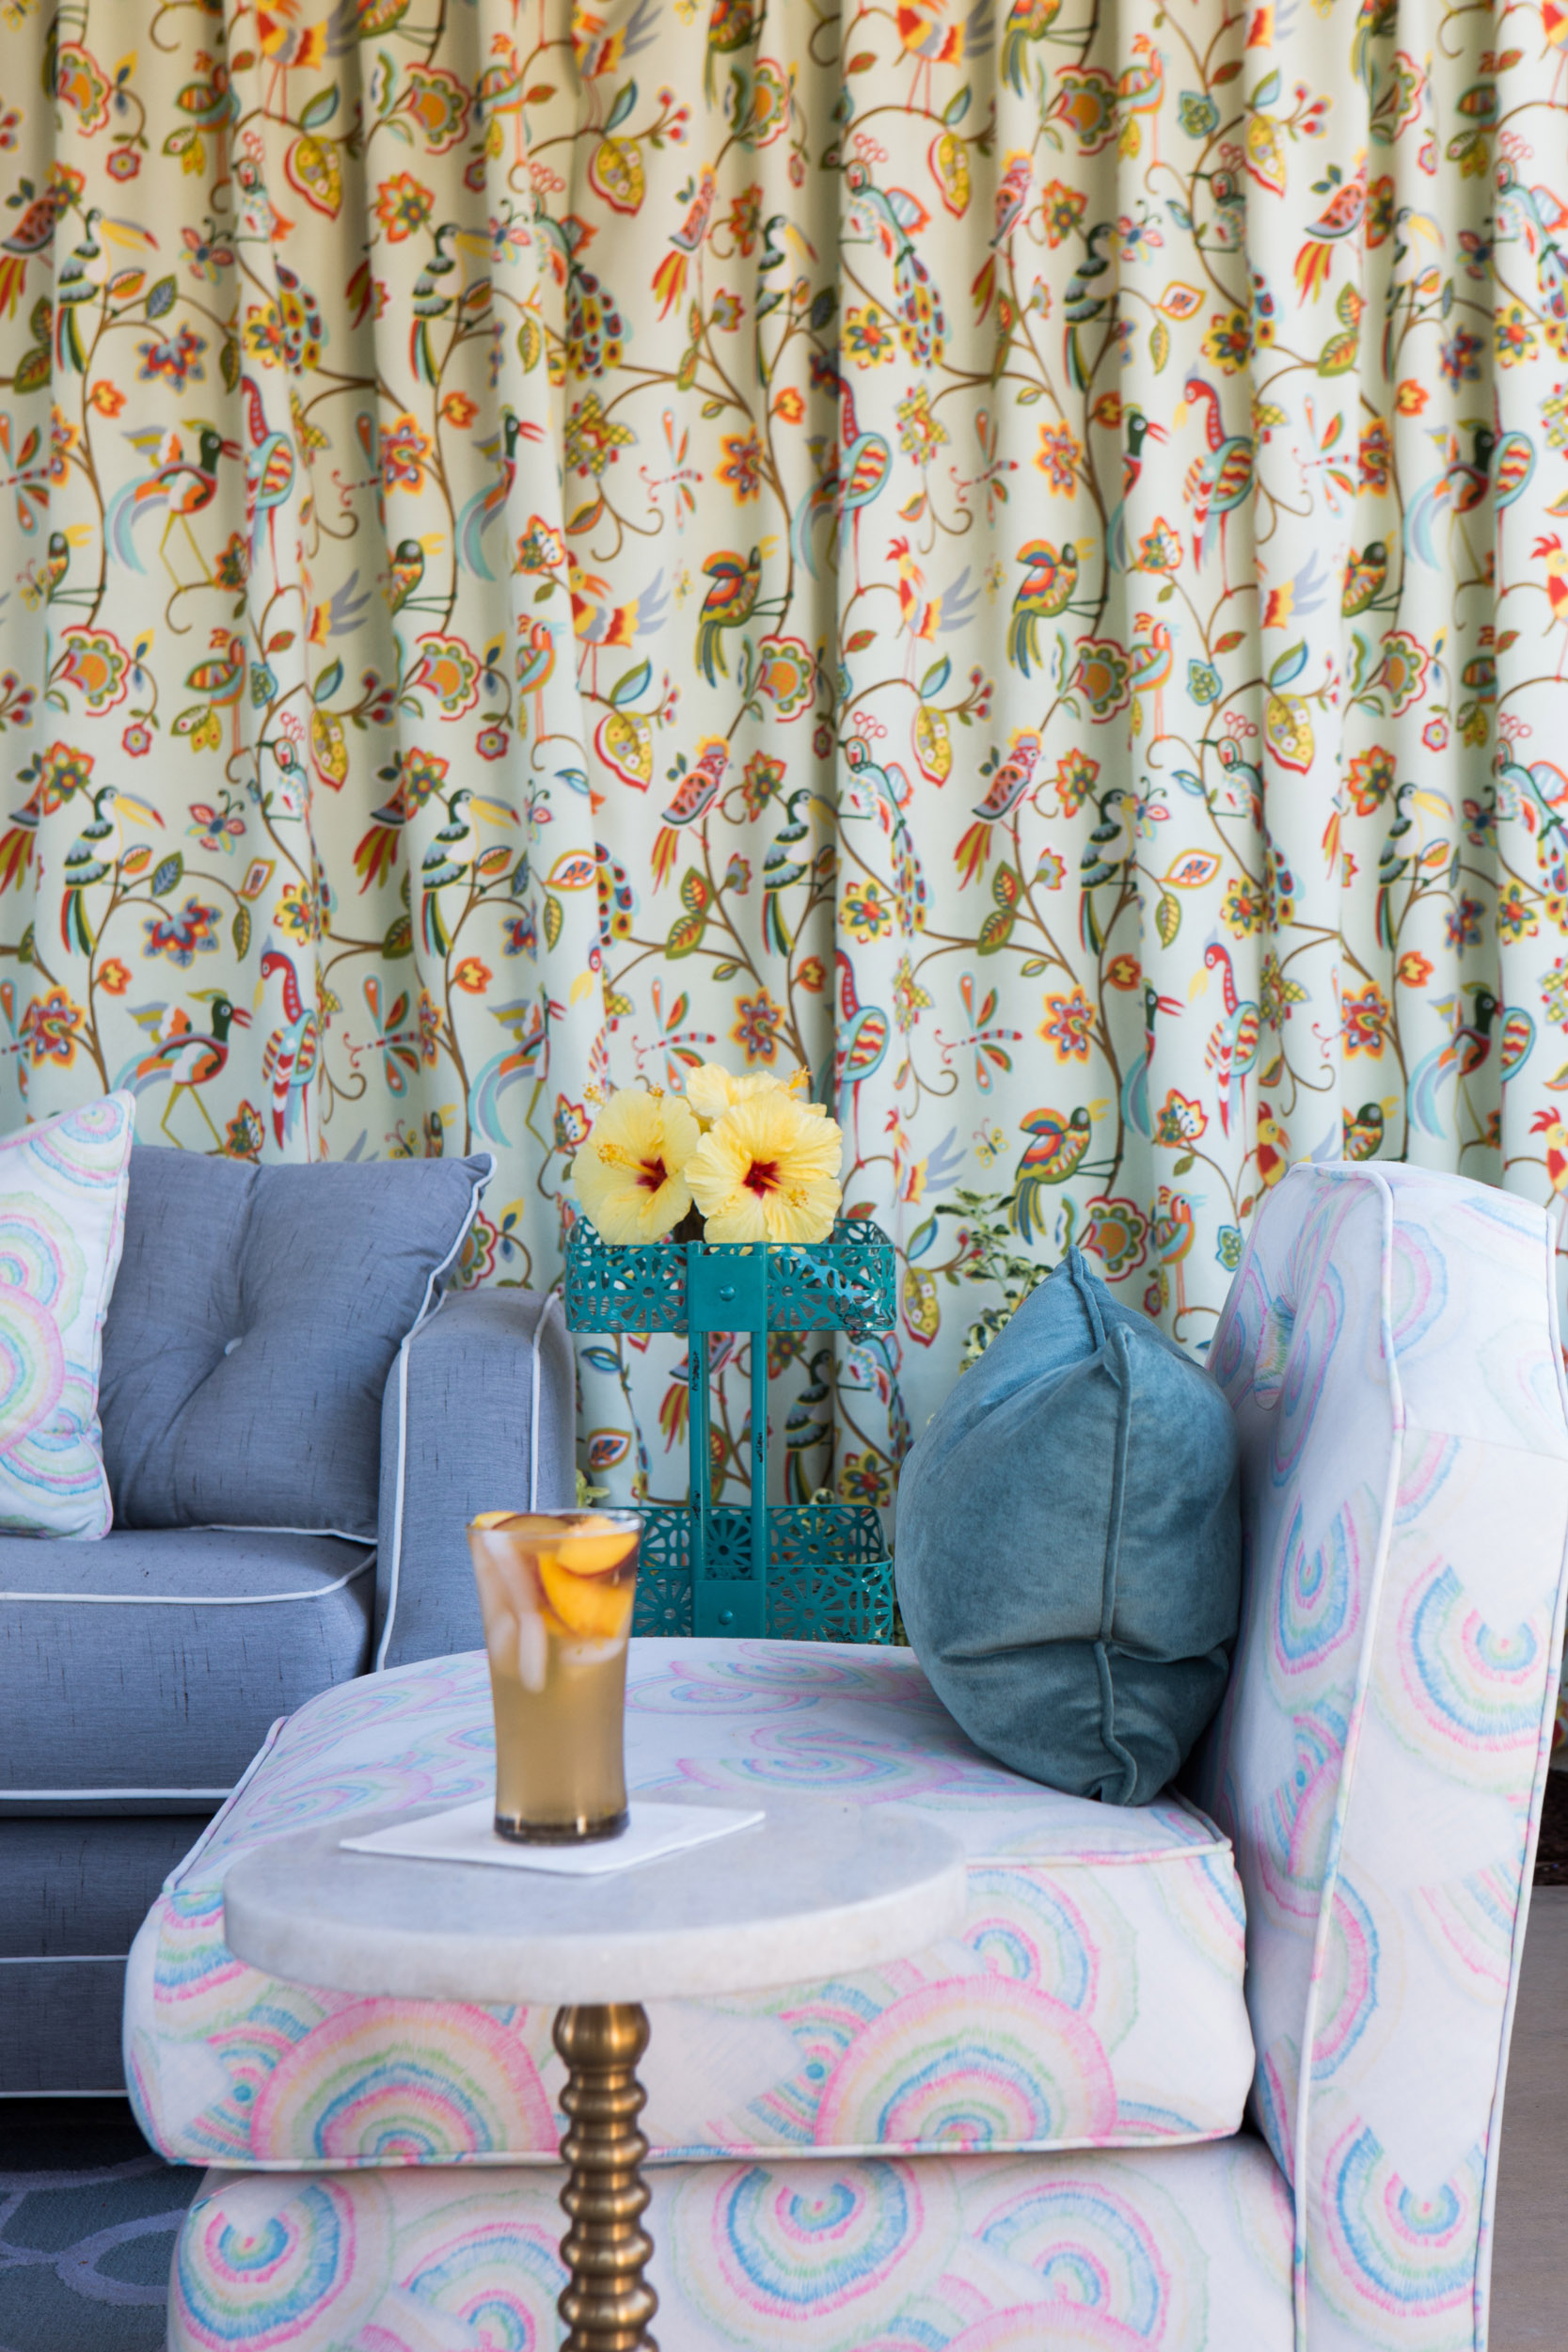 Spring outdoor fabrics make this lounge as chic as one you'd find indoors